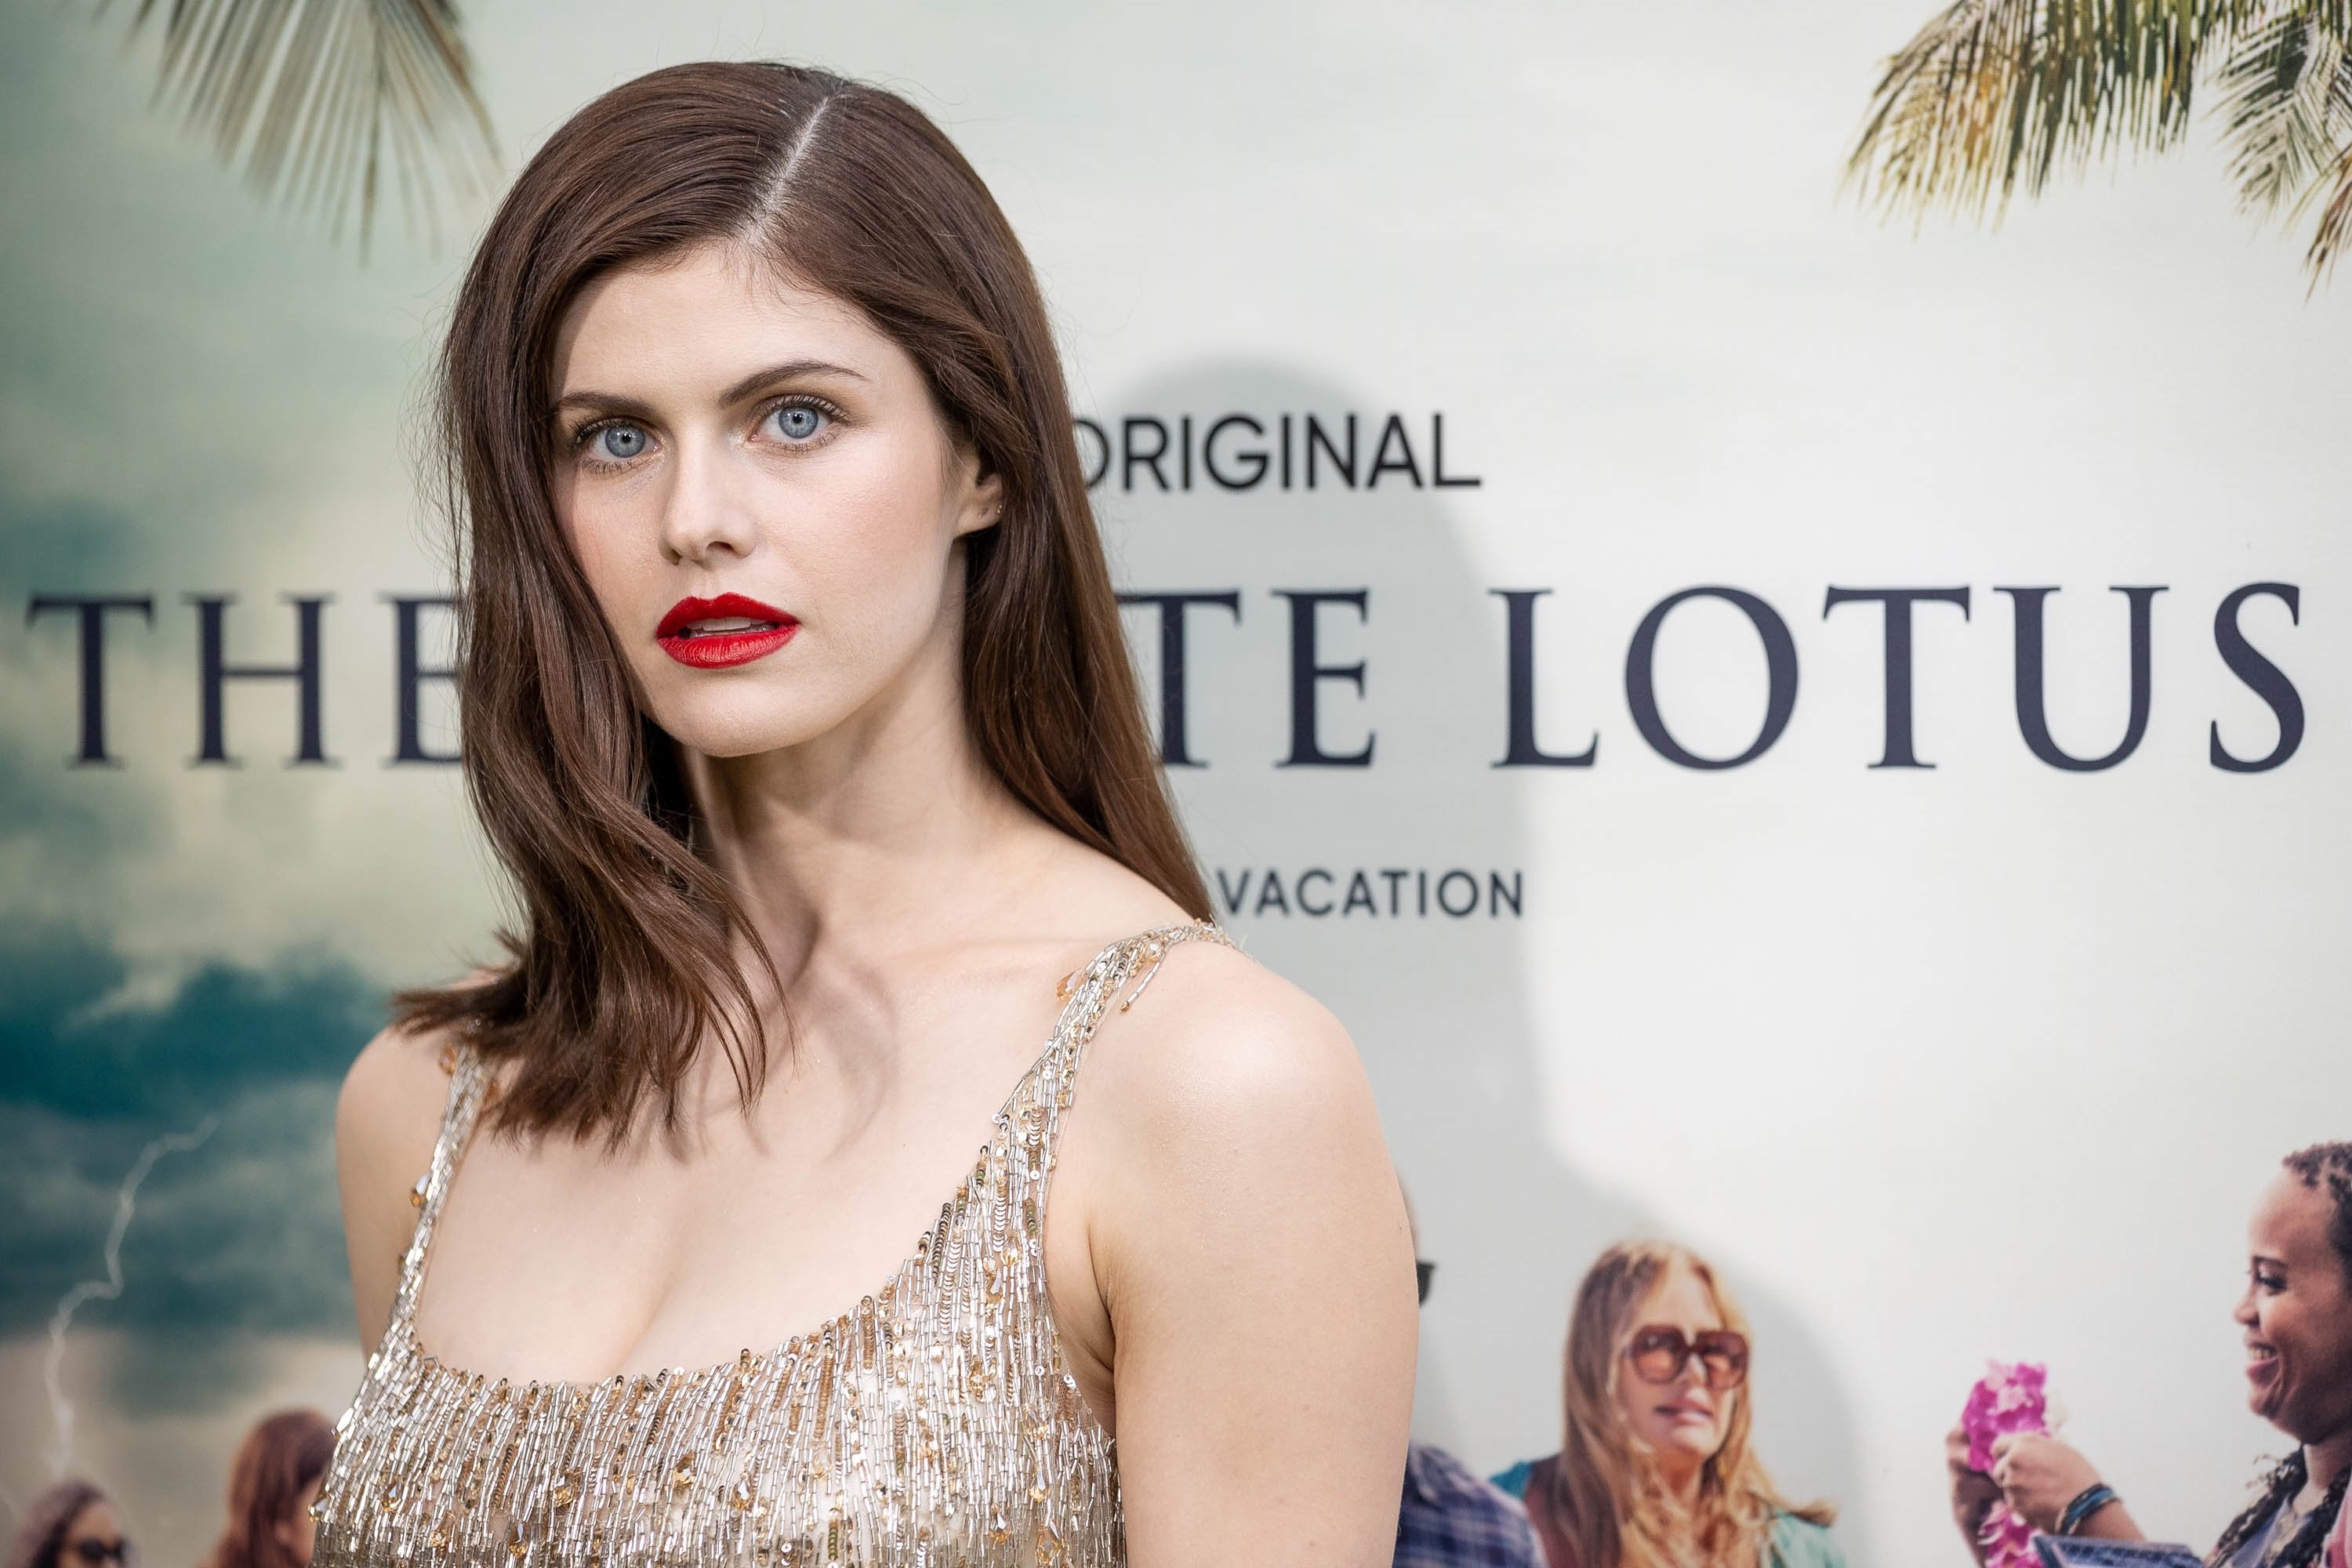 Alexandra Daddario as Rachel in The White Lotus posing for the premiere as fans guess if she was the one who dies in the HBO series